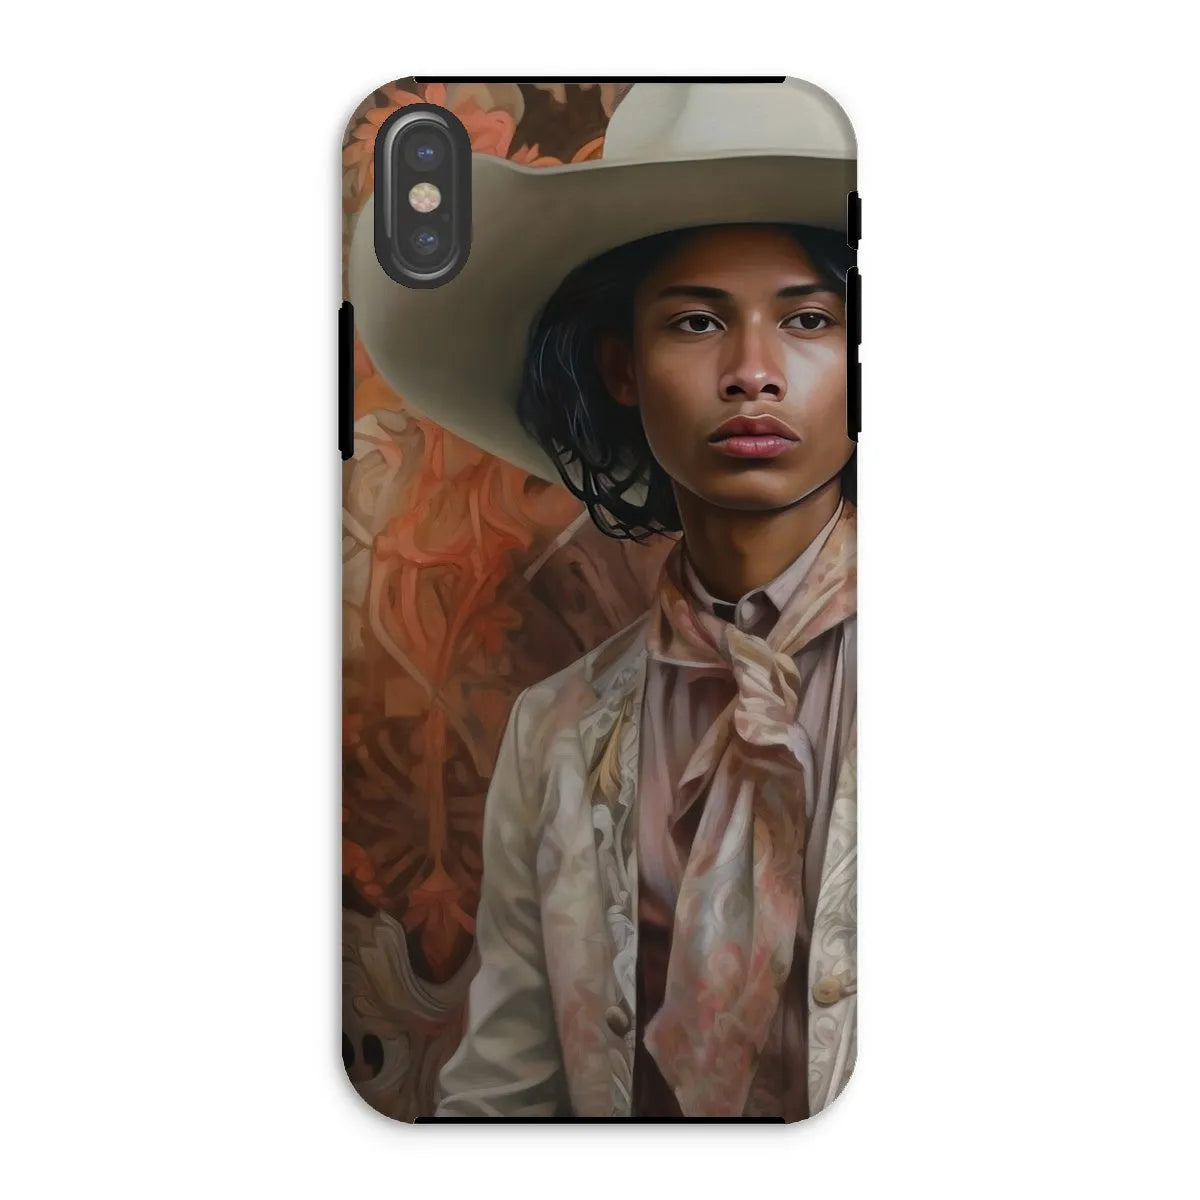 Arjuna The Gay Cowboy - Gay Aesthetic Art Phone Case - Iphone Xs / Matte - Mobile Phone Cases - Aesthetic Art